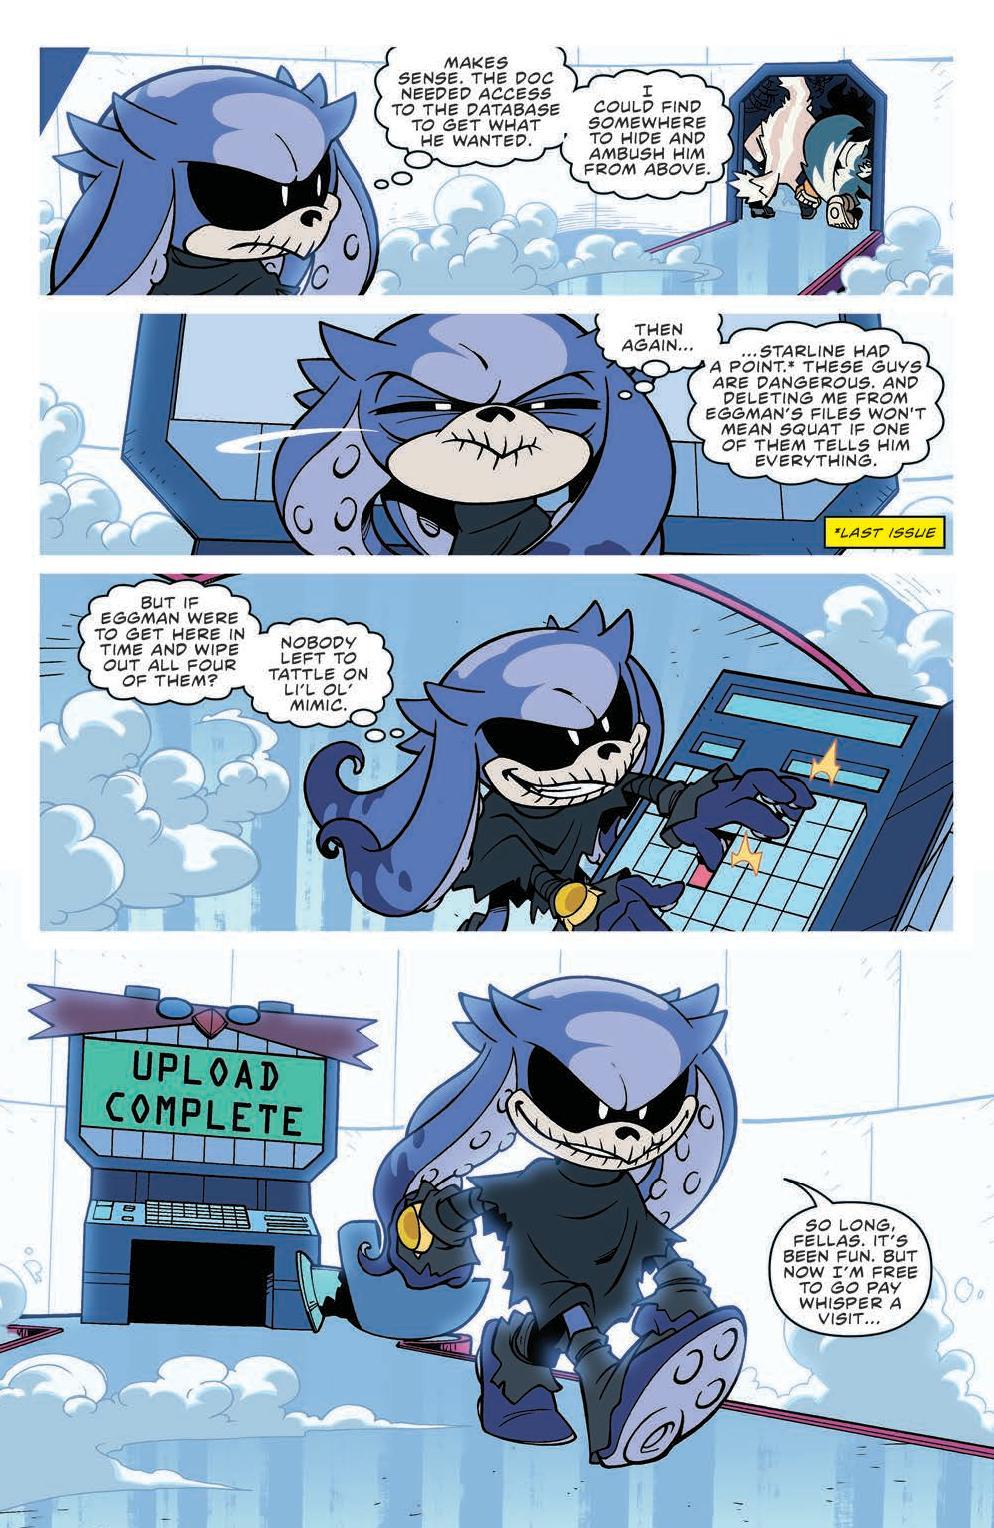 Inside The Pages: Sonic IDW Bad Guys #3